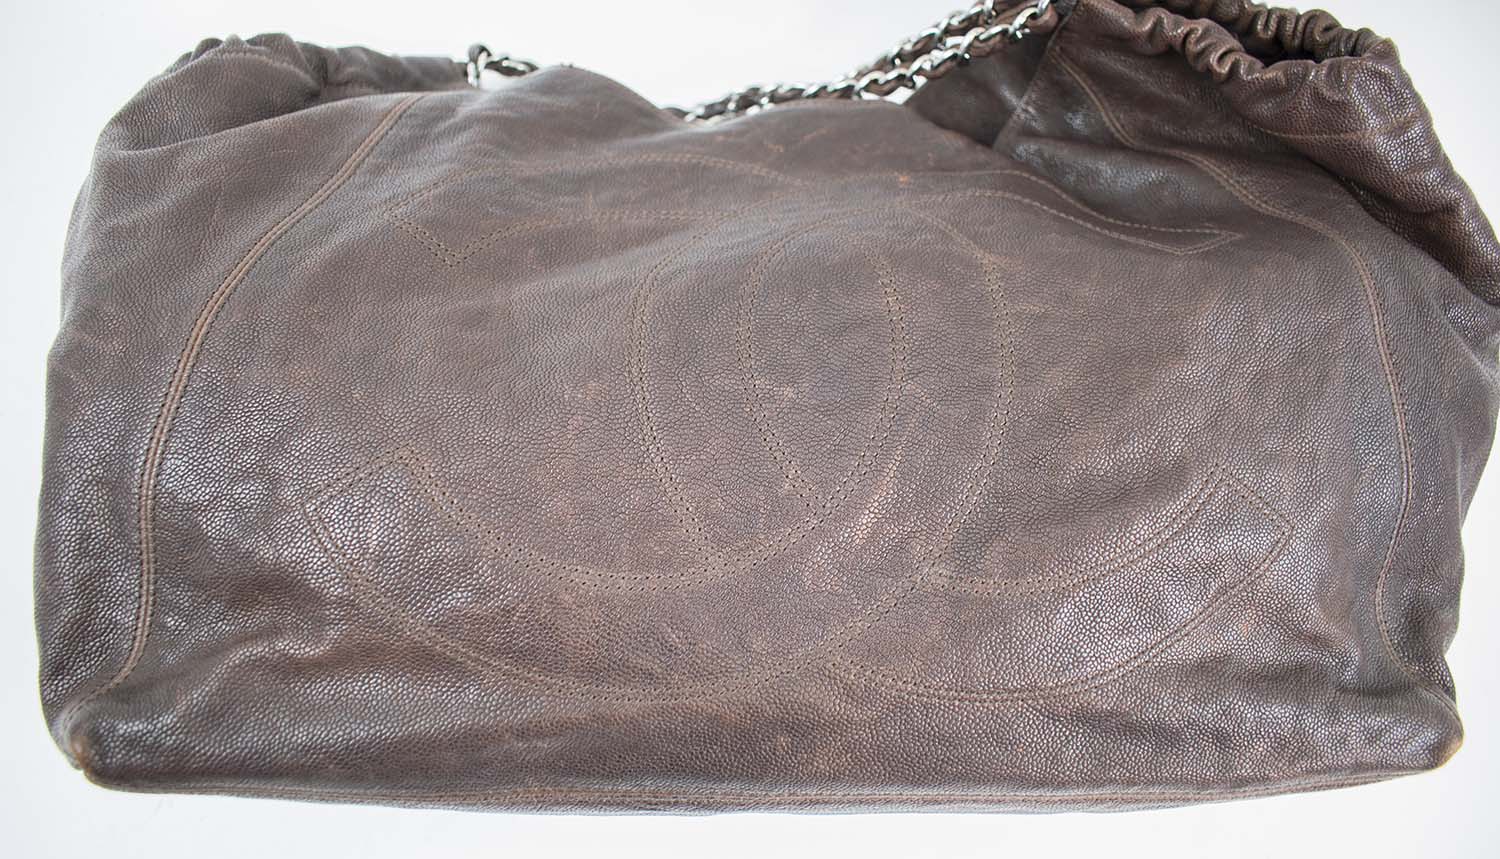 CHANEL COCO CABAS HOBO BAG, brown leather grain with silver tone charm,  leather and chain shoulder strap, logo embossed, fabric lining, inside  sticker 10896371, with inside pouch, magnetic snap closure, 45cm x